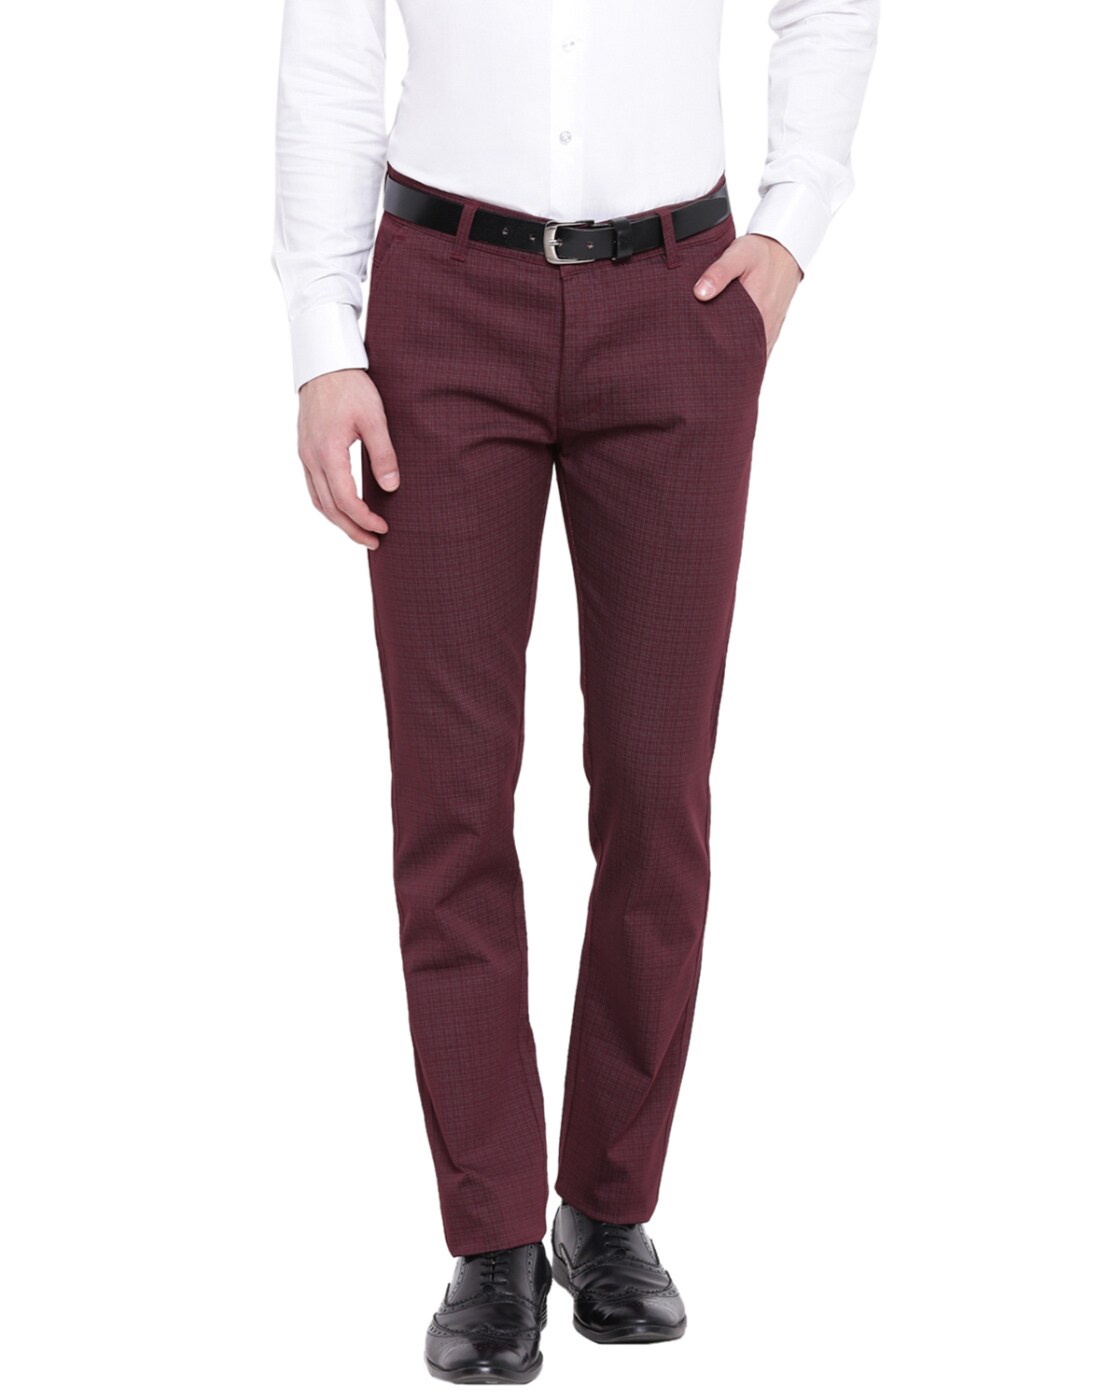 What Color Shoes To Wear With What Color Pants - The Fine Young Gentleman